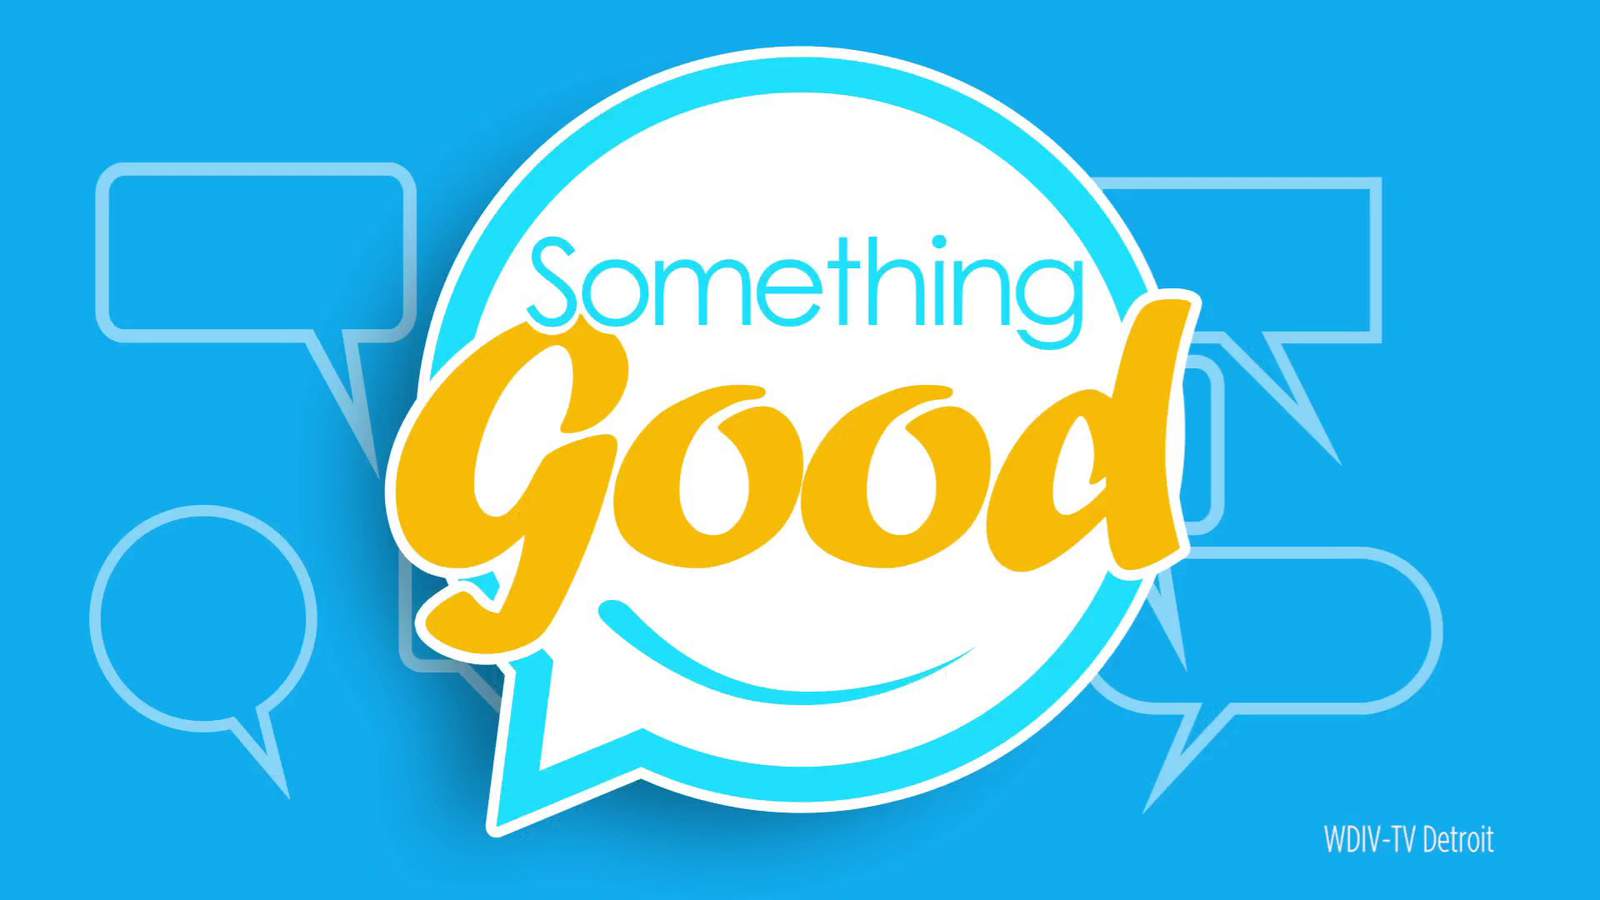 Need a dose of kindness? Watch Something Good